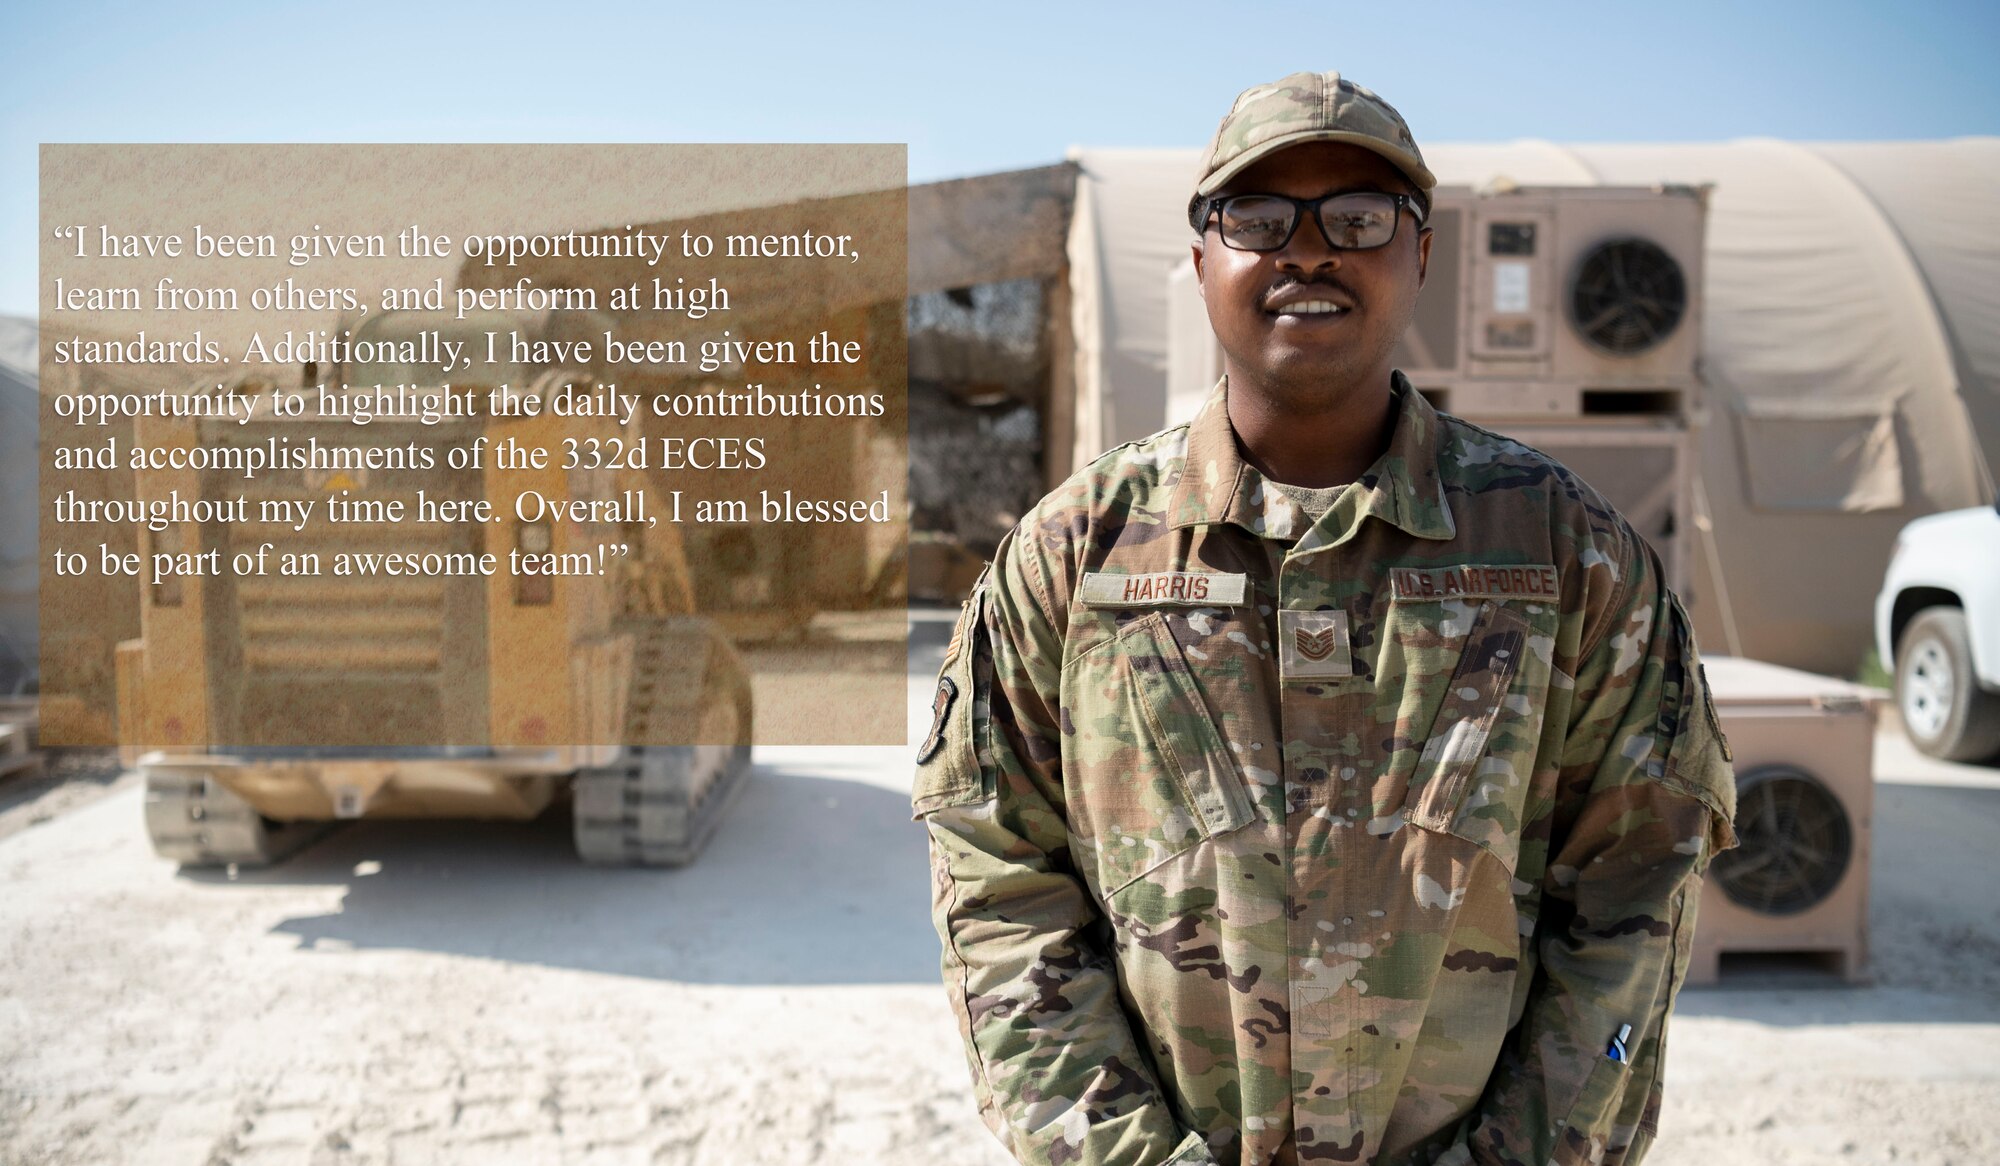 The 332d Air Expeditionary Wing honored Technical Sergeant Jeremy Harris, 332d Civil Engineer Squadron, Resource Advisor as Warrior of the Week at an undisclosed location in Southwest Asia on August 10, 2022. Warrior of the Week is a competitive recognition program that highlights significant contributors made by individual airmen who raise the Red Tail standard and enhance the mission and capabilities of the 332d Air Expeditionary Wing.